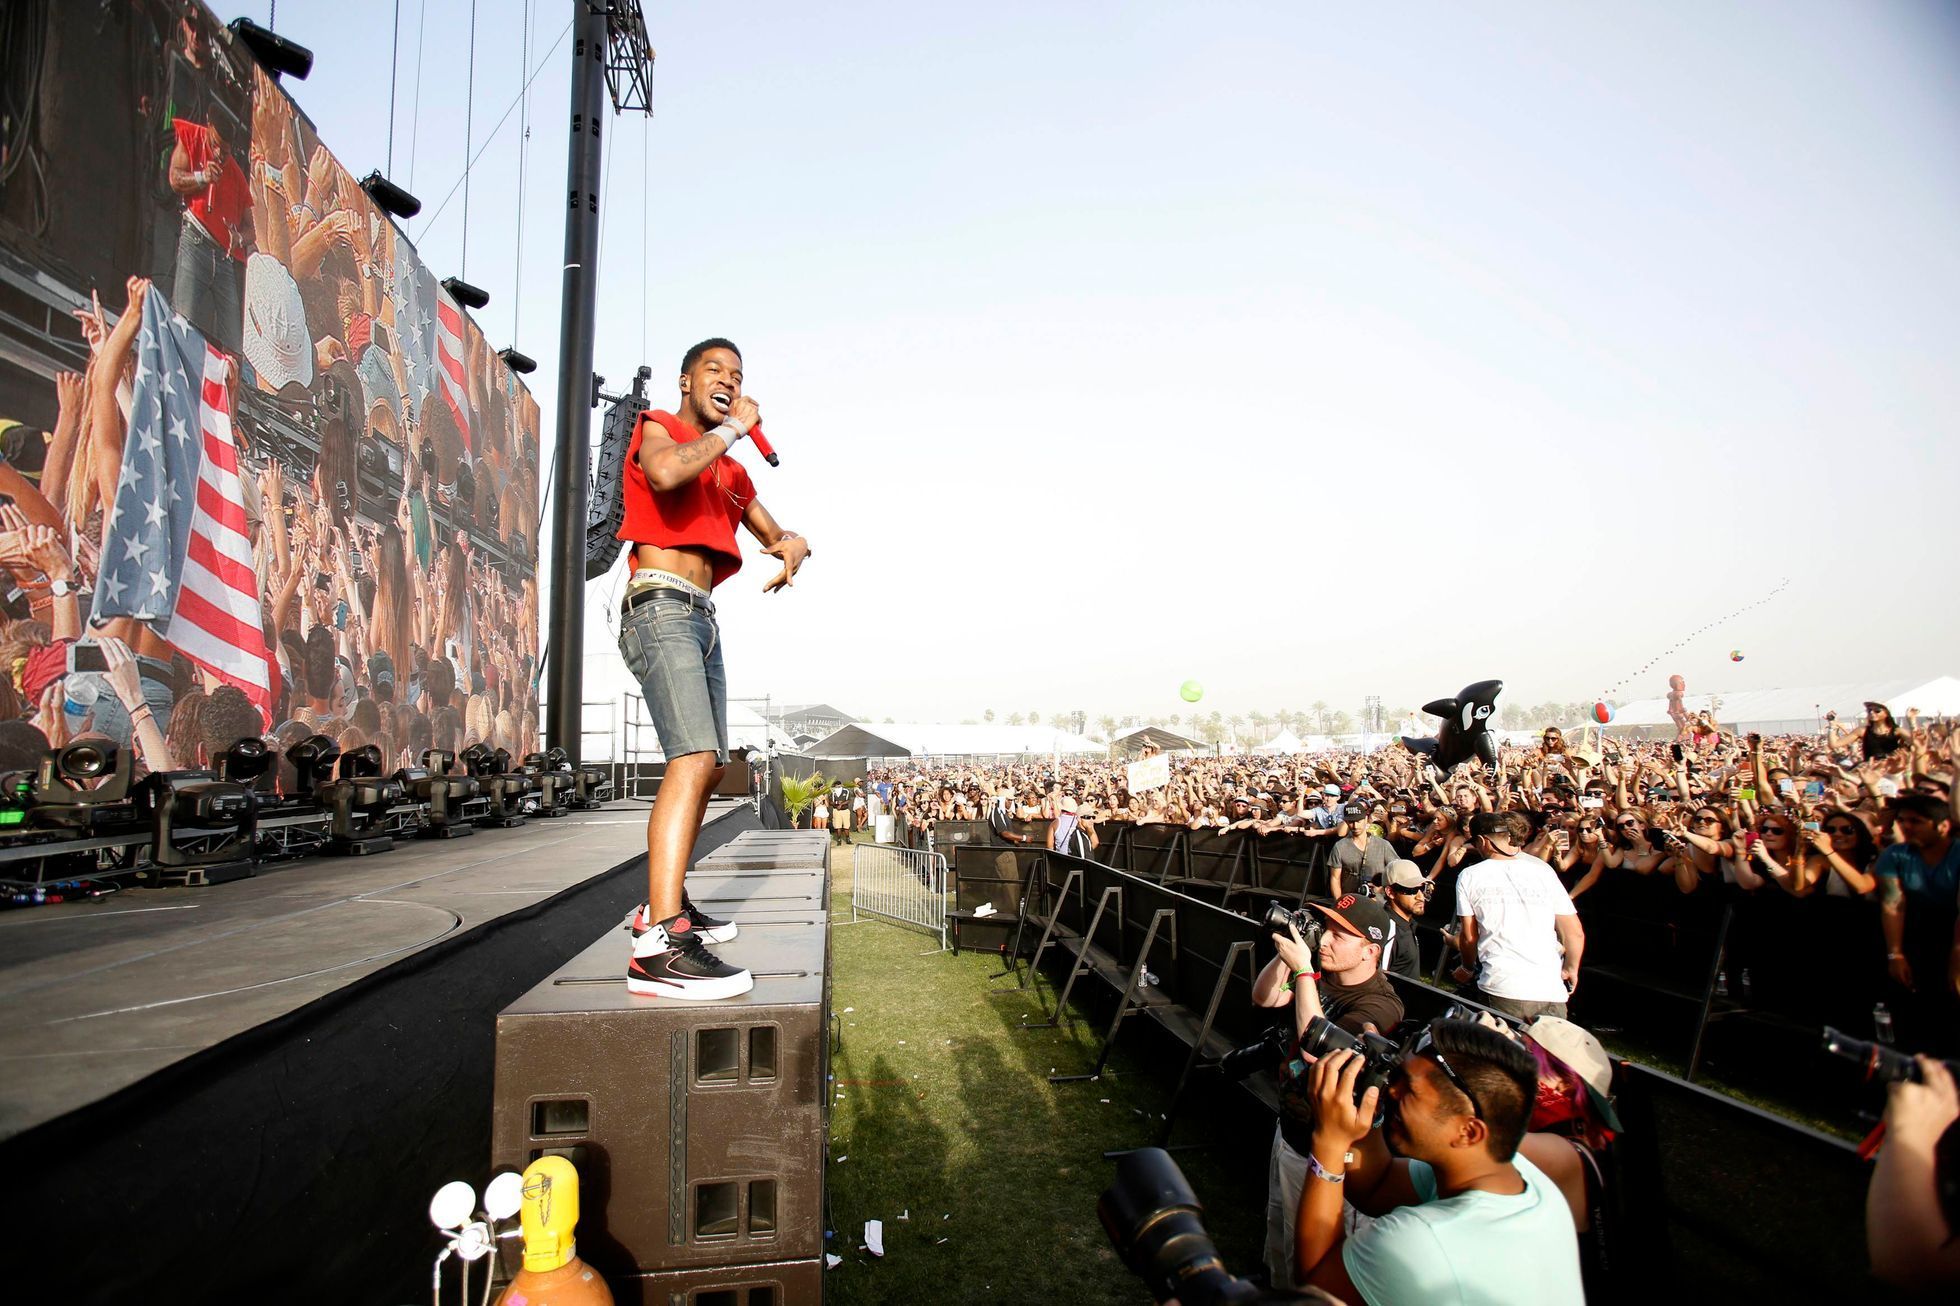 Kid Cudi performs at the Coachella Valley Music and Arts Festival in Indio